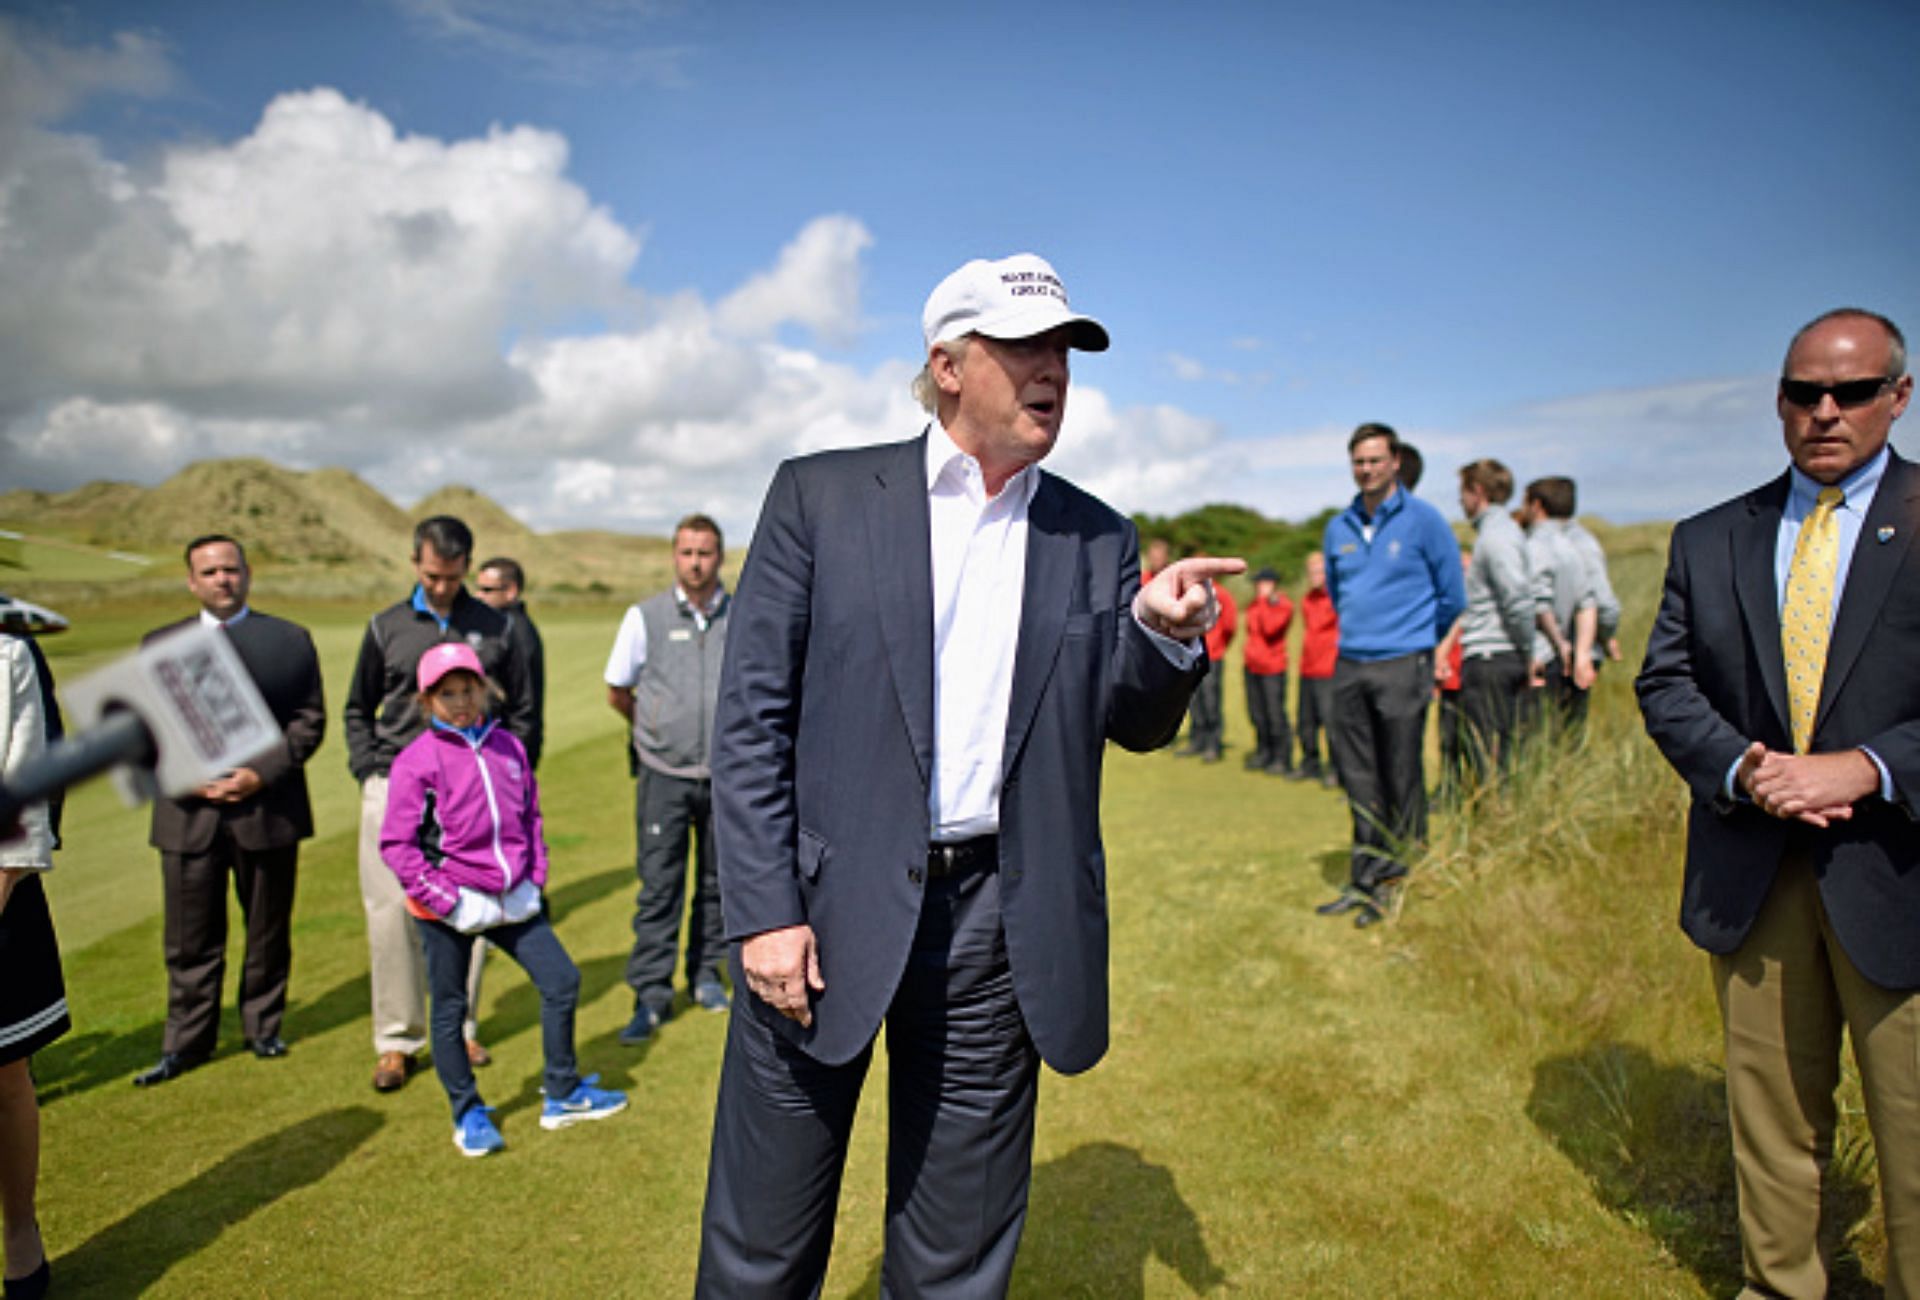 Donald Trump visiting Aberdeenshire golf course, 2016 (Image via Getty).